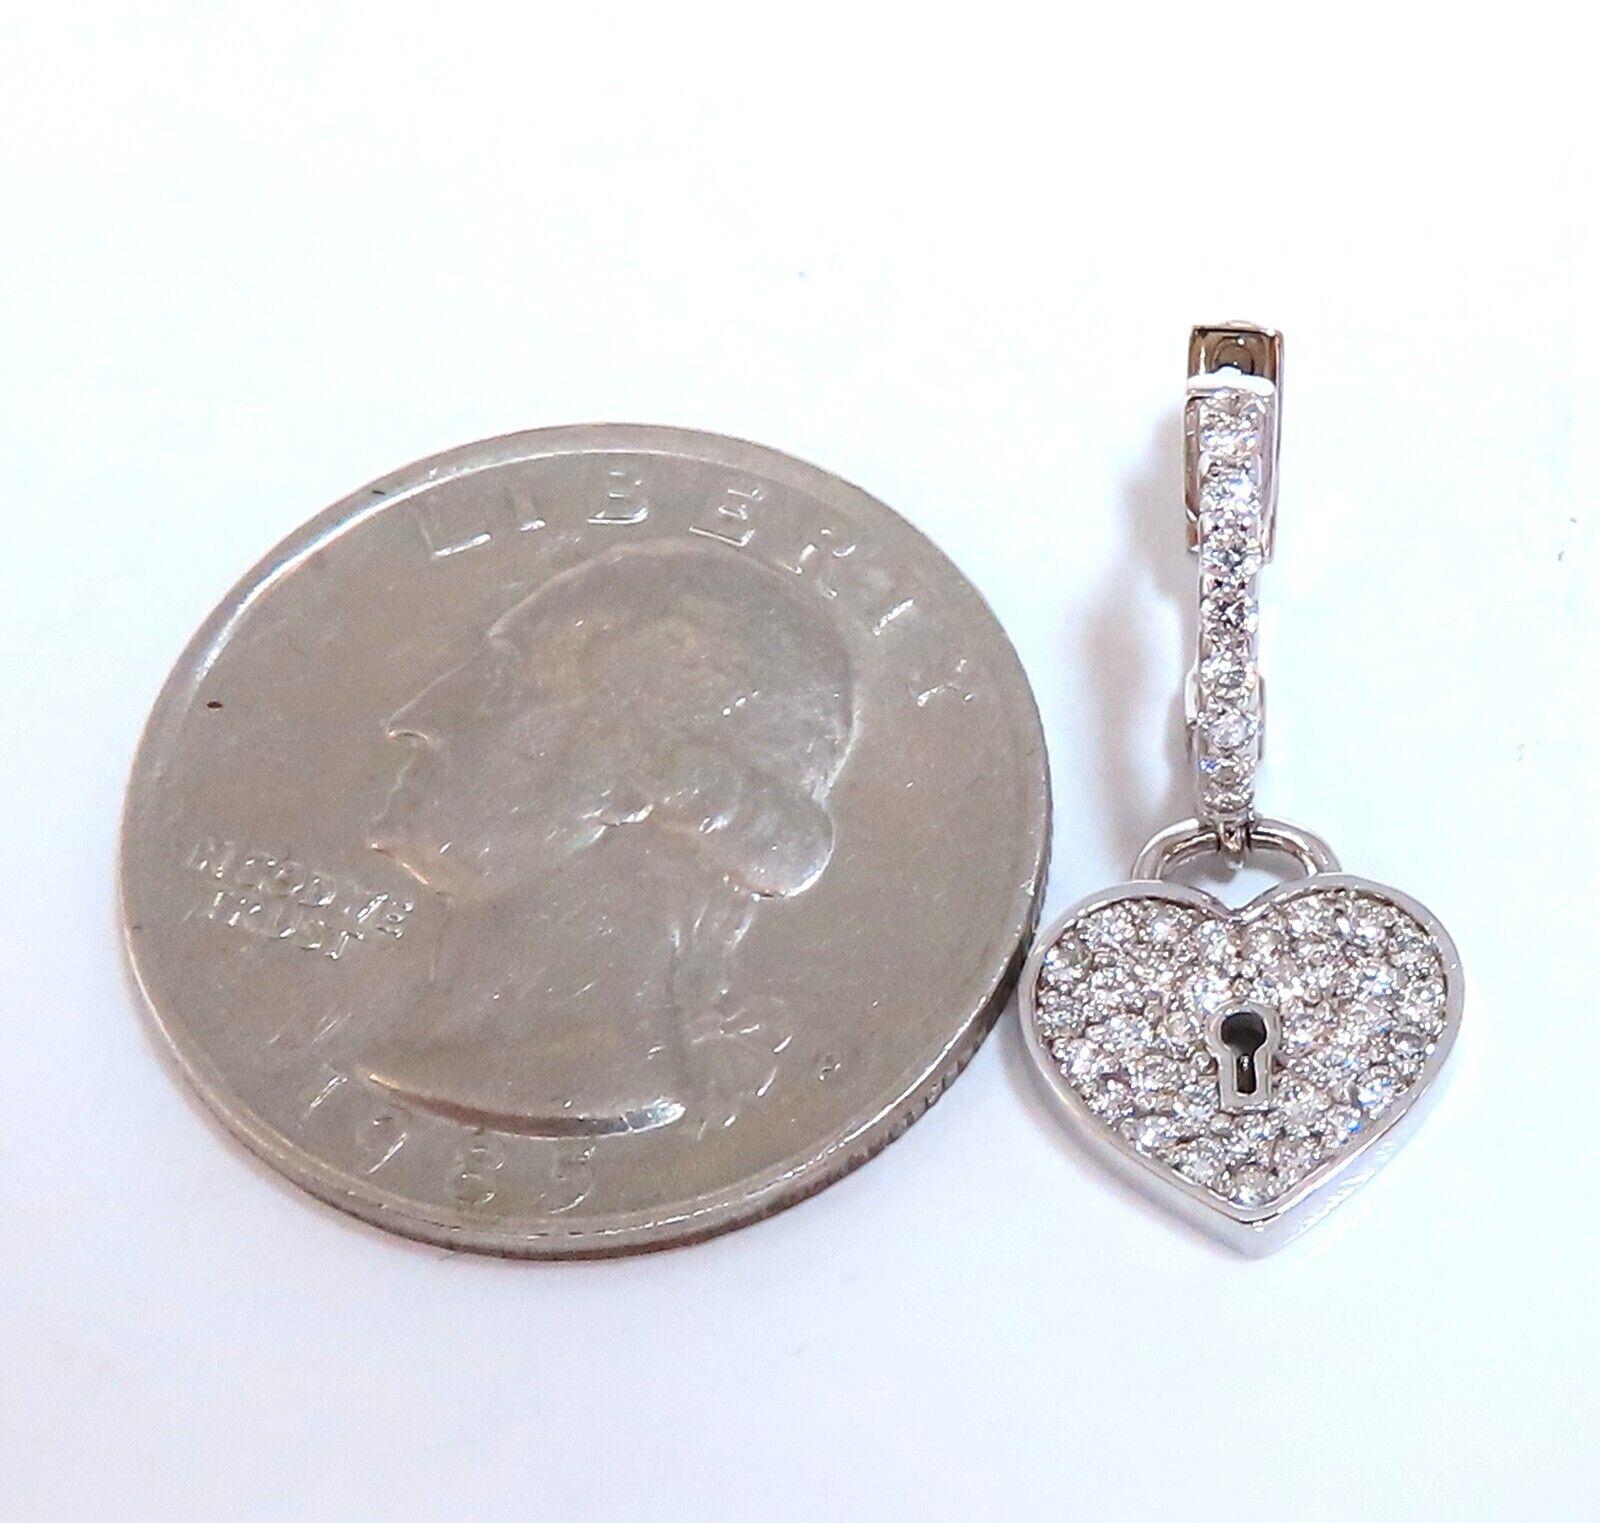 Heart Flat diamond earrings.

1 carat natural round diamonds

G color vs2 clarity

14kt white gold 5 g

Earrings measure 24mm long 

$6000 appraisal certificate to accompany